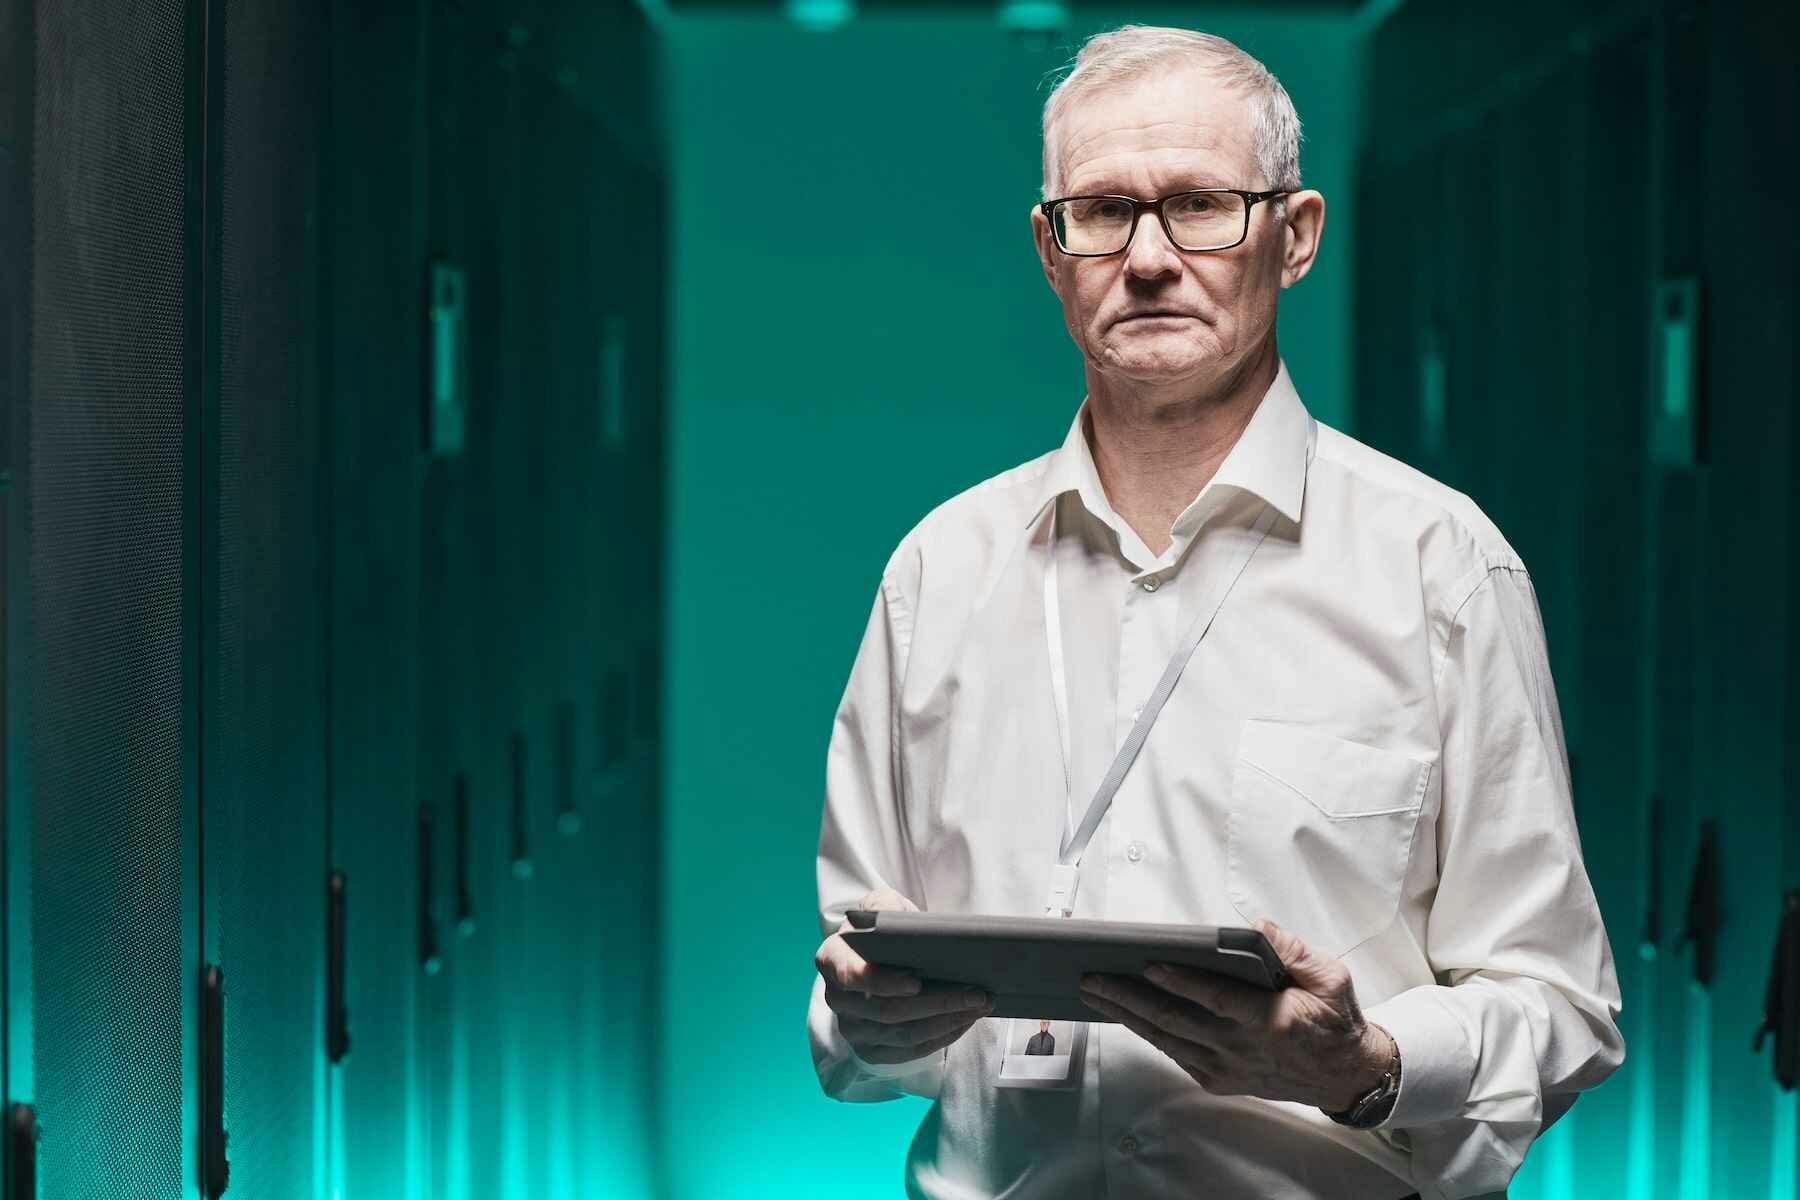 guy standing in data center with a tablet in hand